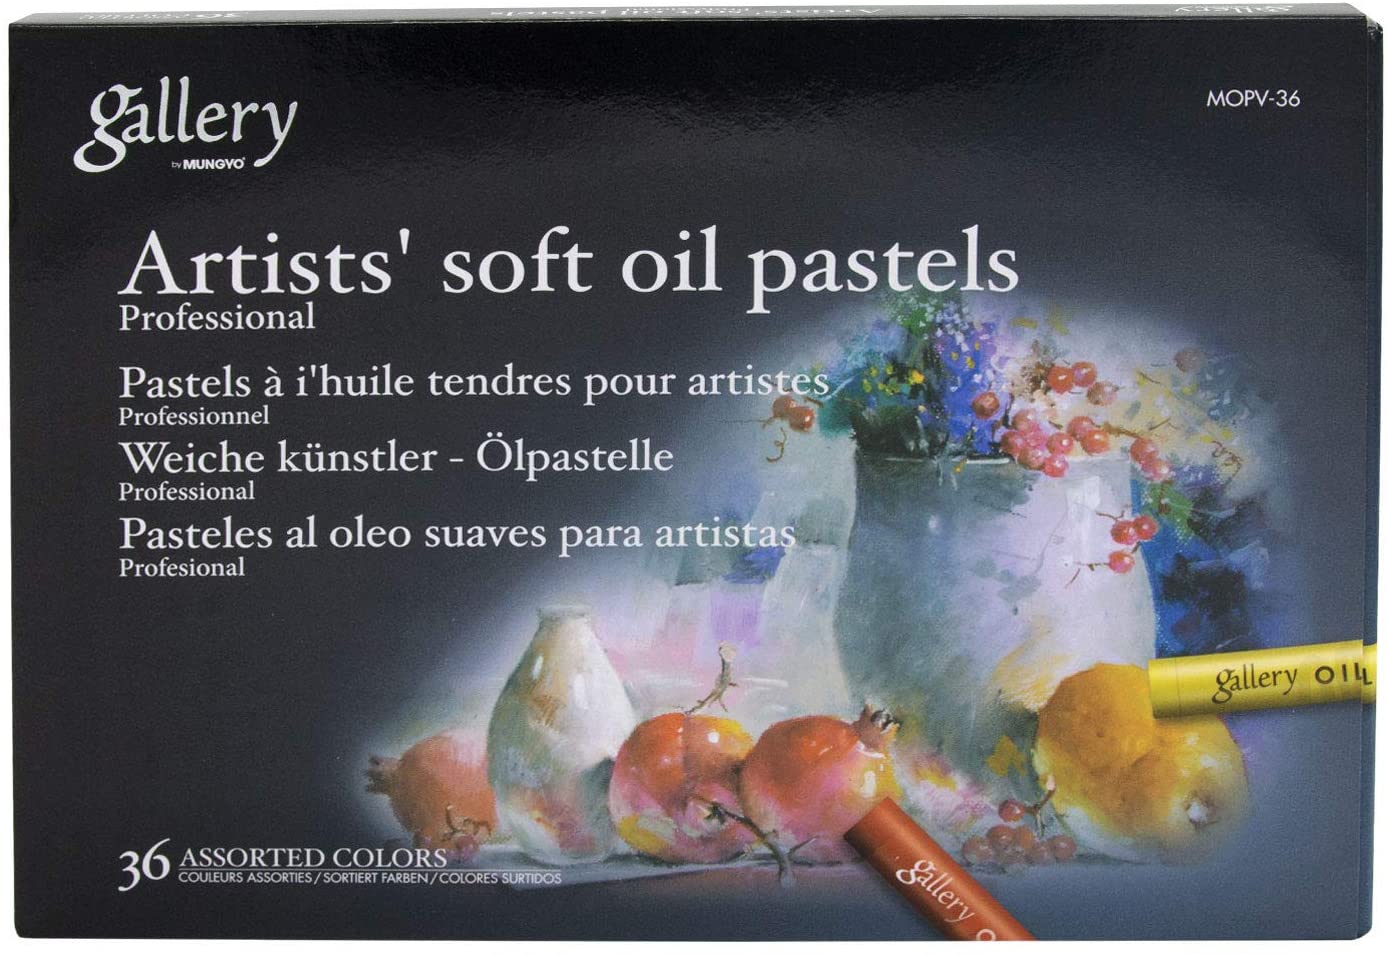 Mungyo Gallery Soft Oil Pastels Set of 36 - Assorted Colors (Professional MOPV-36)